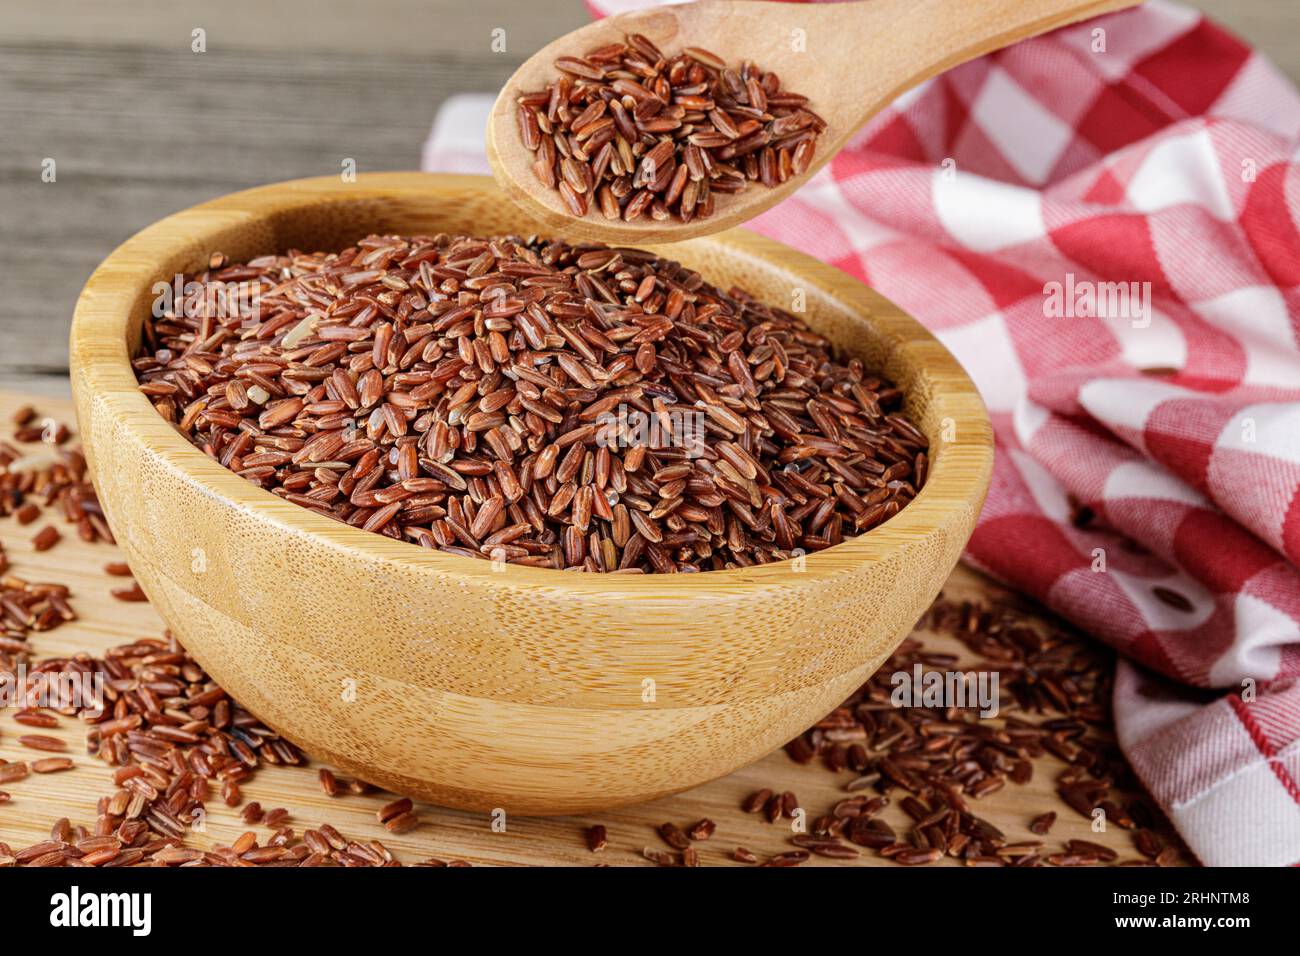 A Wooden Bowl of delicious and healthy Red Rice isolated on a wooden background with copy space Stock Photo